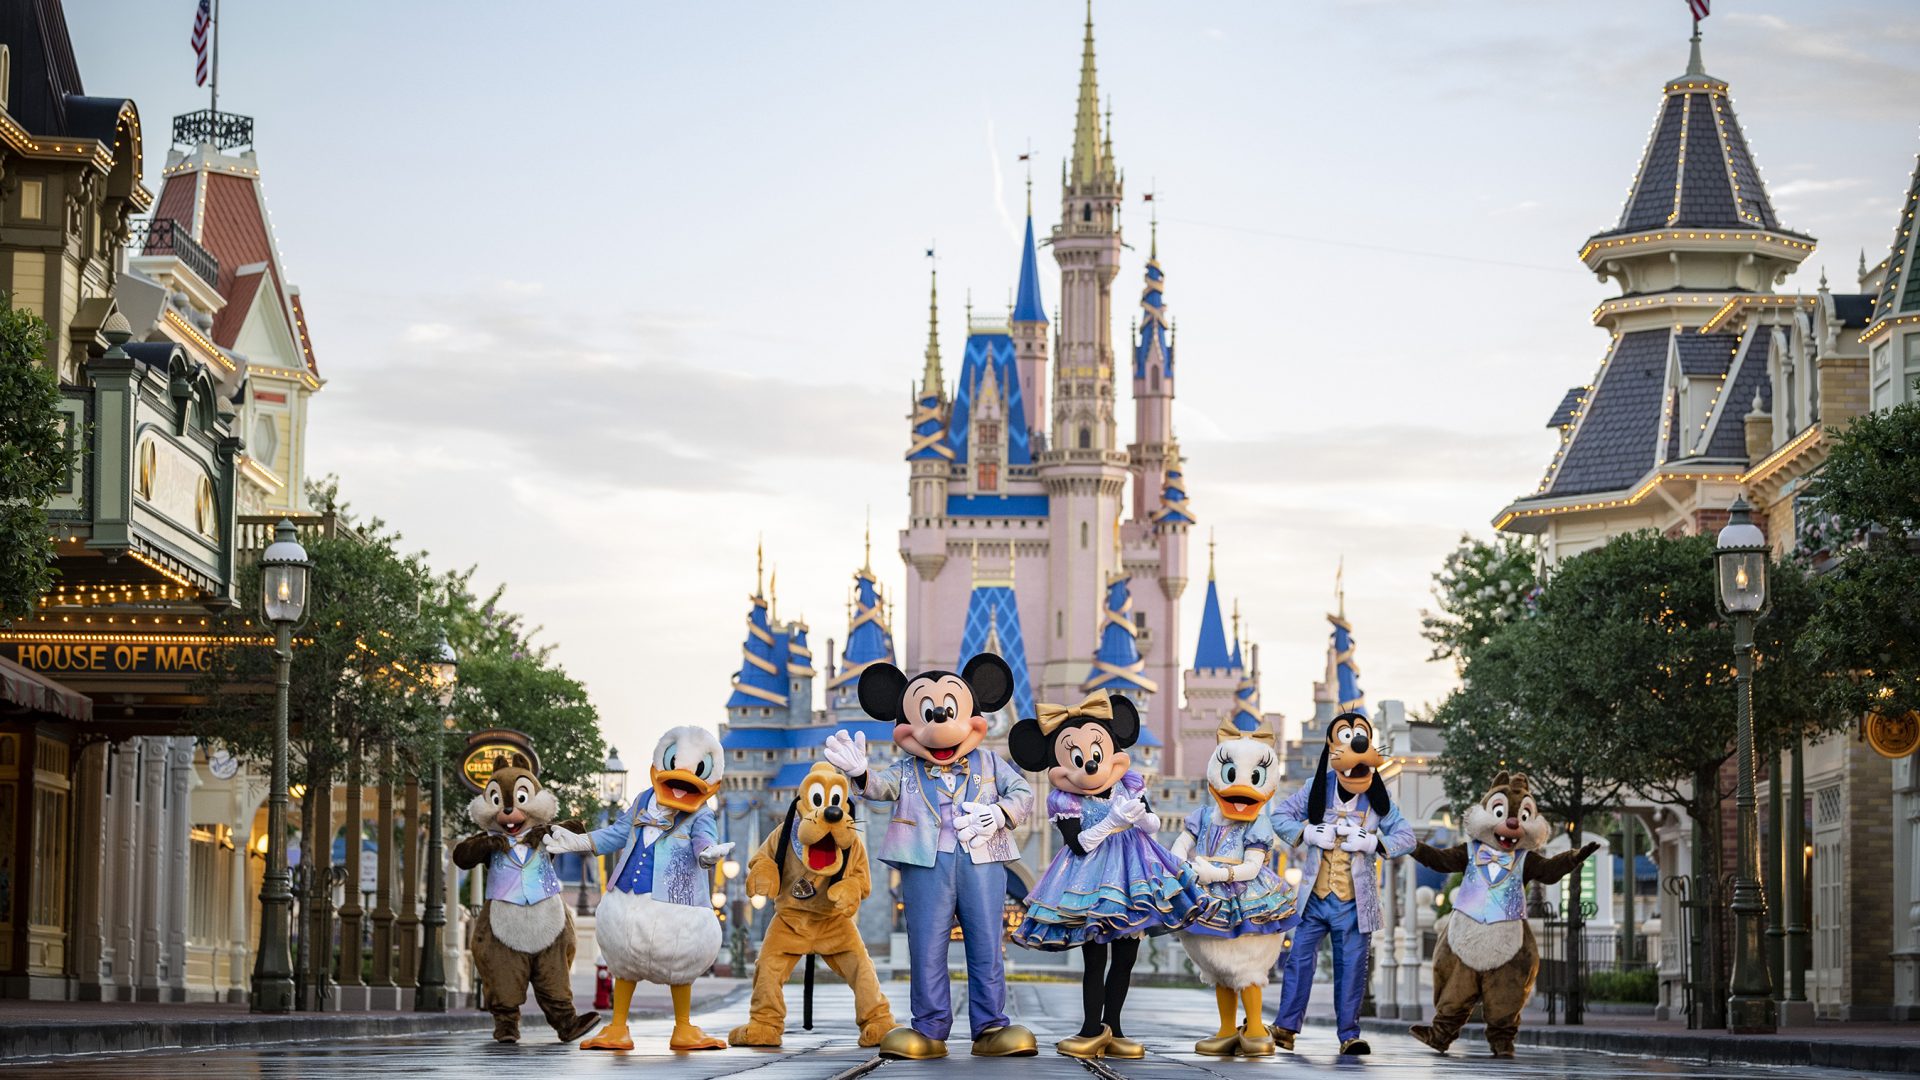 How to Explore the Disney World Resort in Orlando for Free